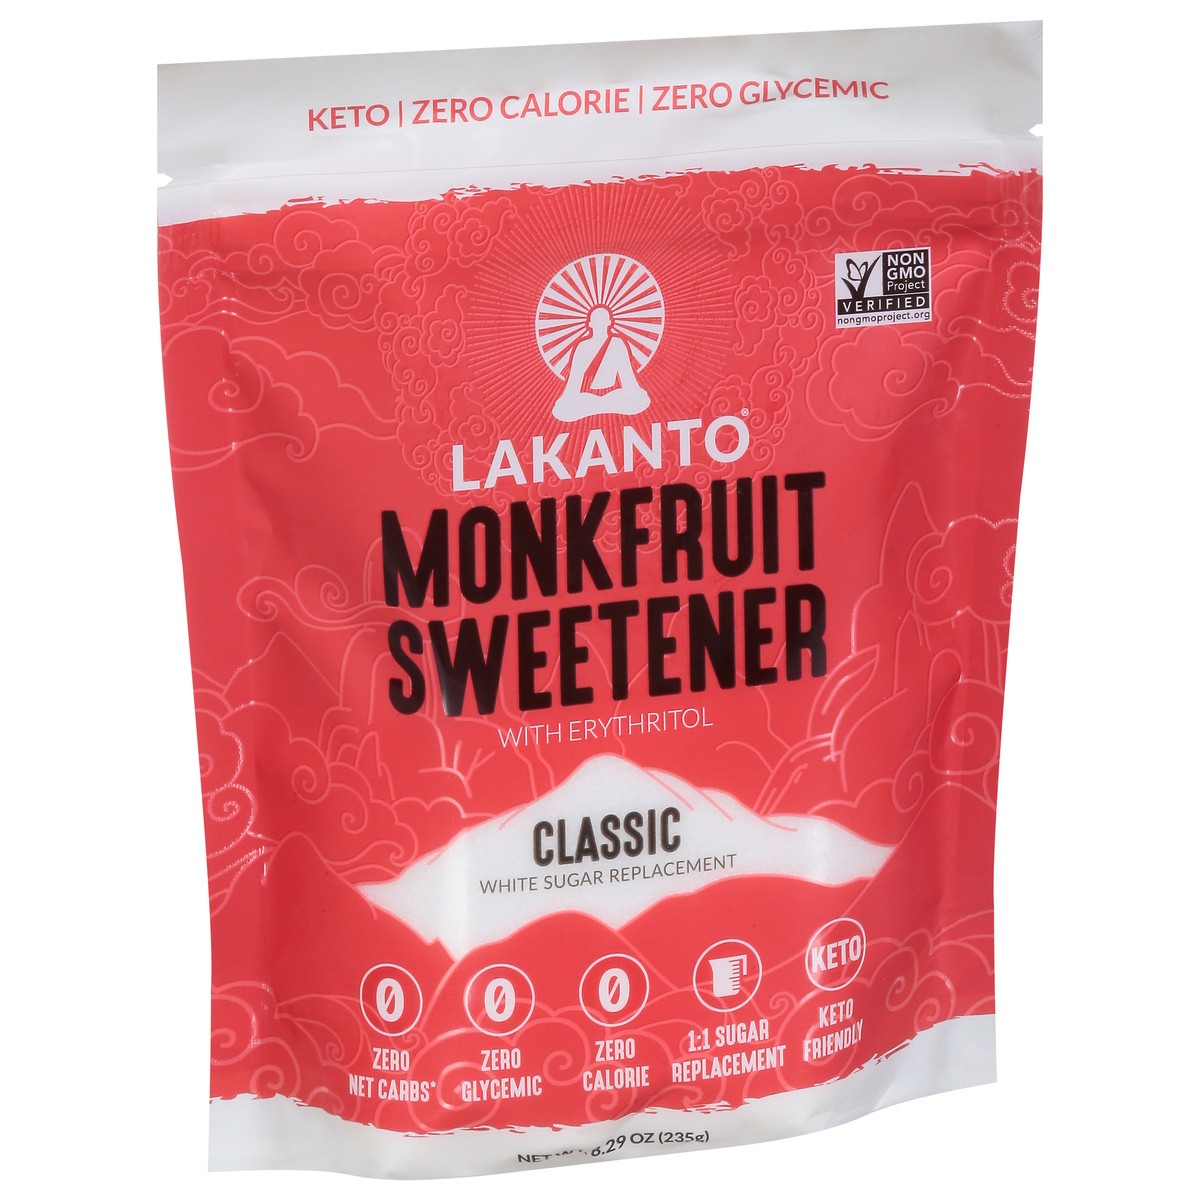 slide 2 of 9, Lakanto Classic Monkfruit Sweetener White Sugar Replacement with Erythritol 8.29 oz, 8.29 oz